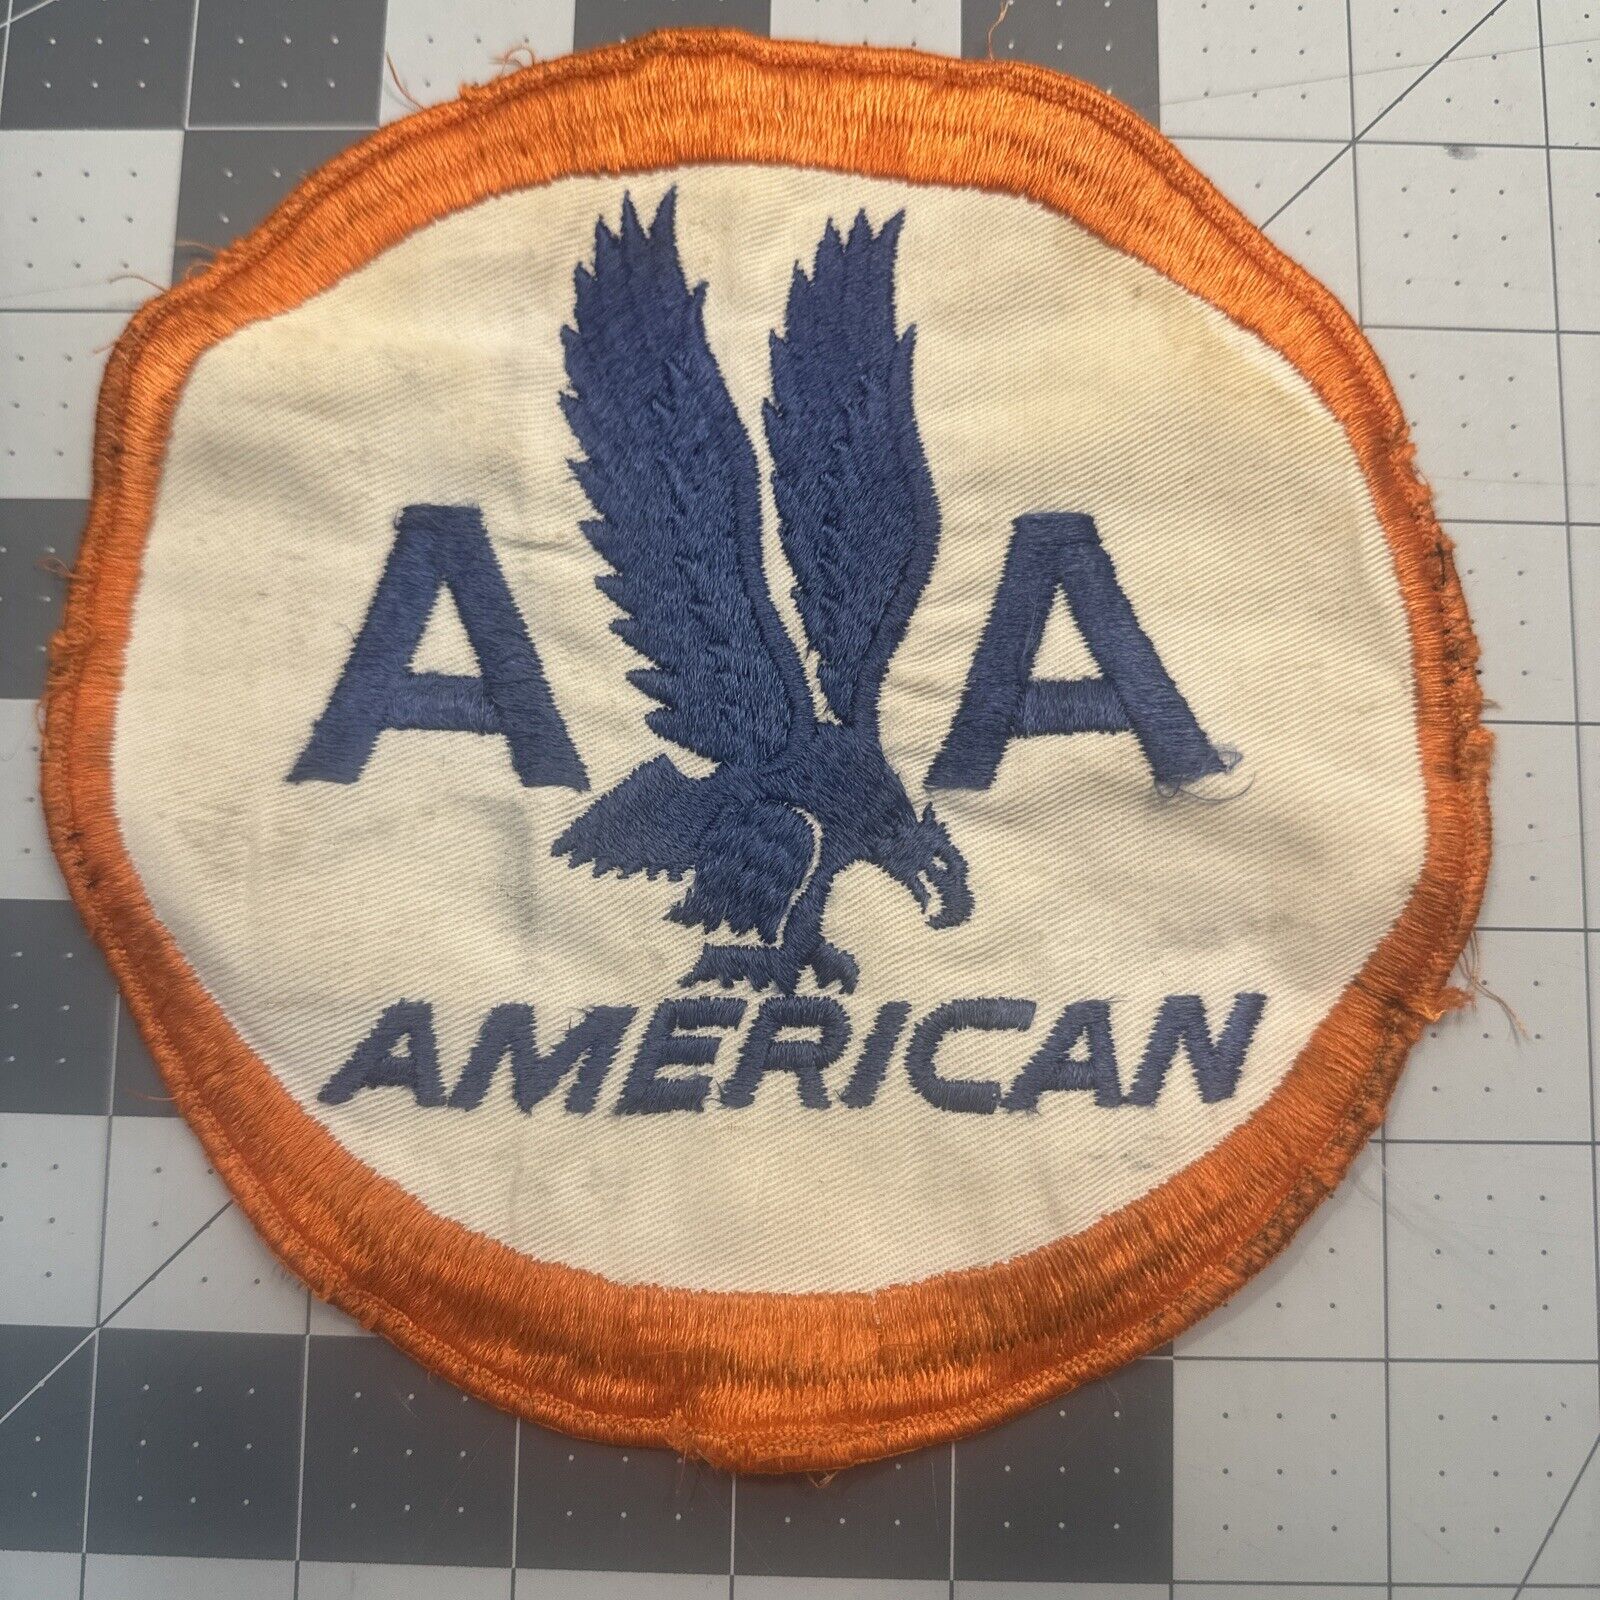 VTG AMERICAN AIRLINES 6.5” Embroidered Jacket Patch 1962-67